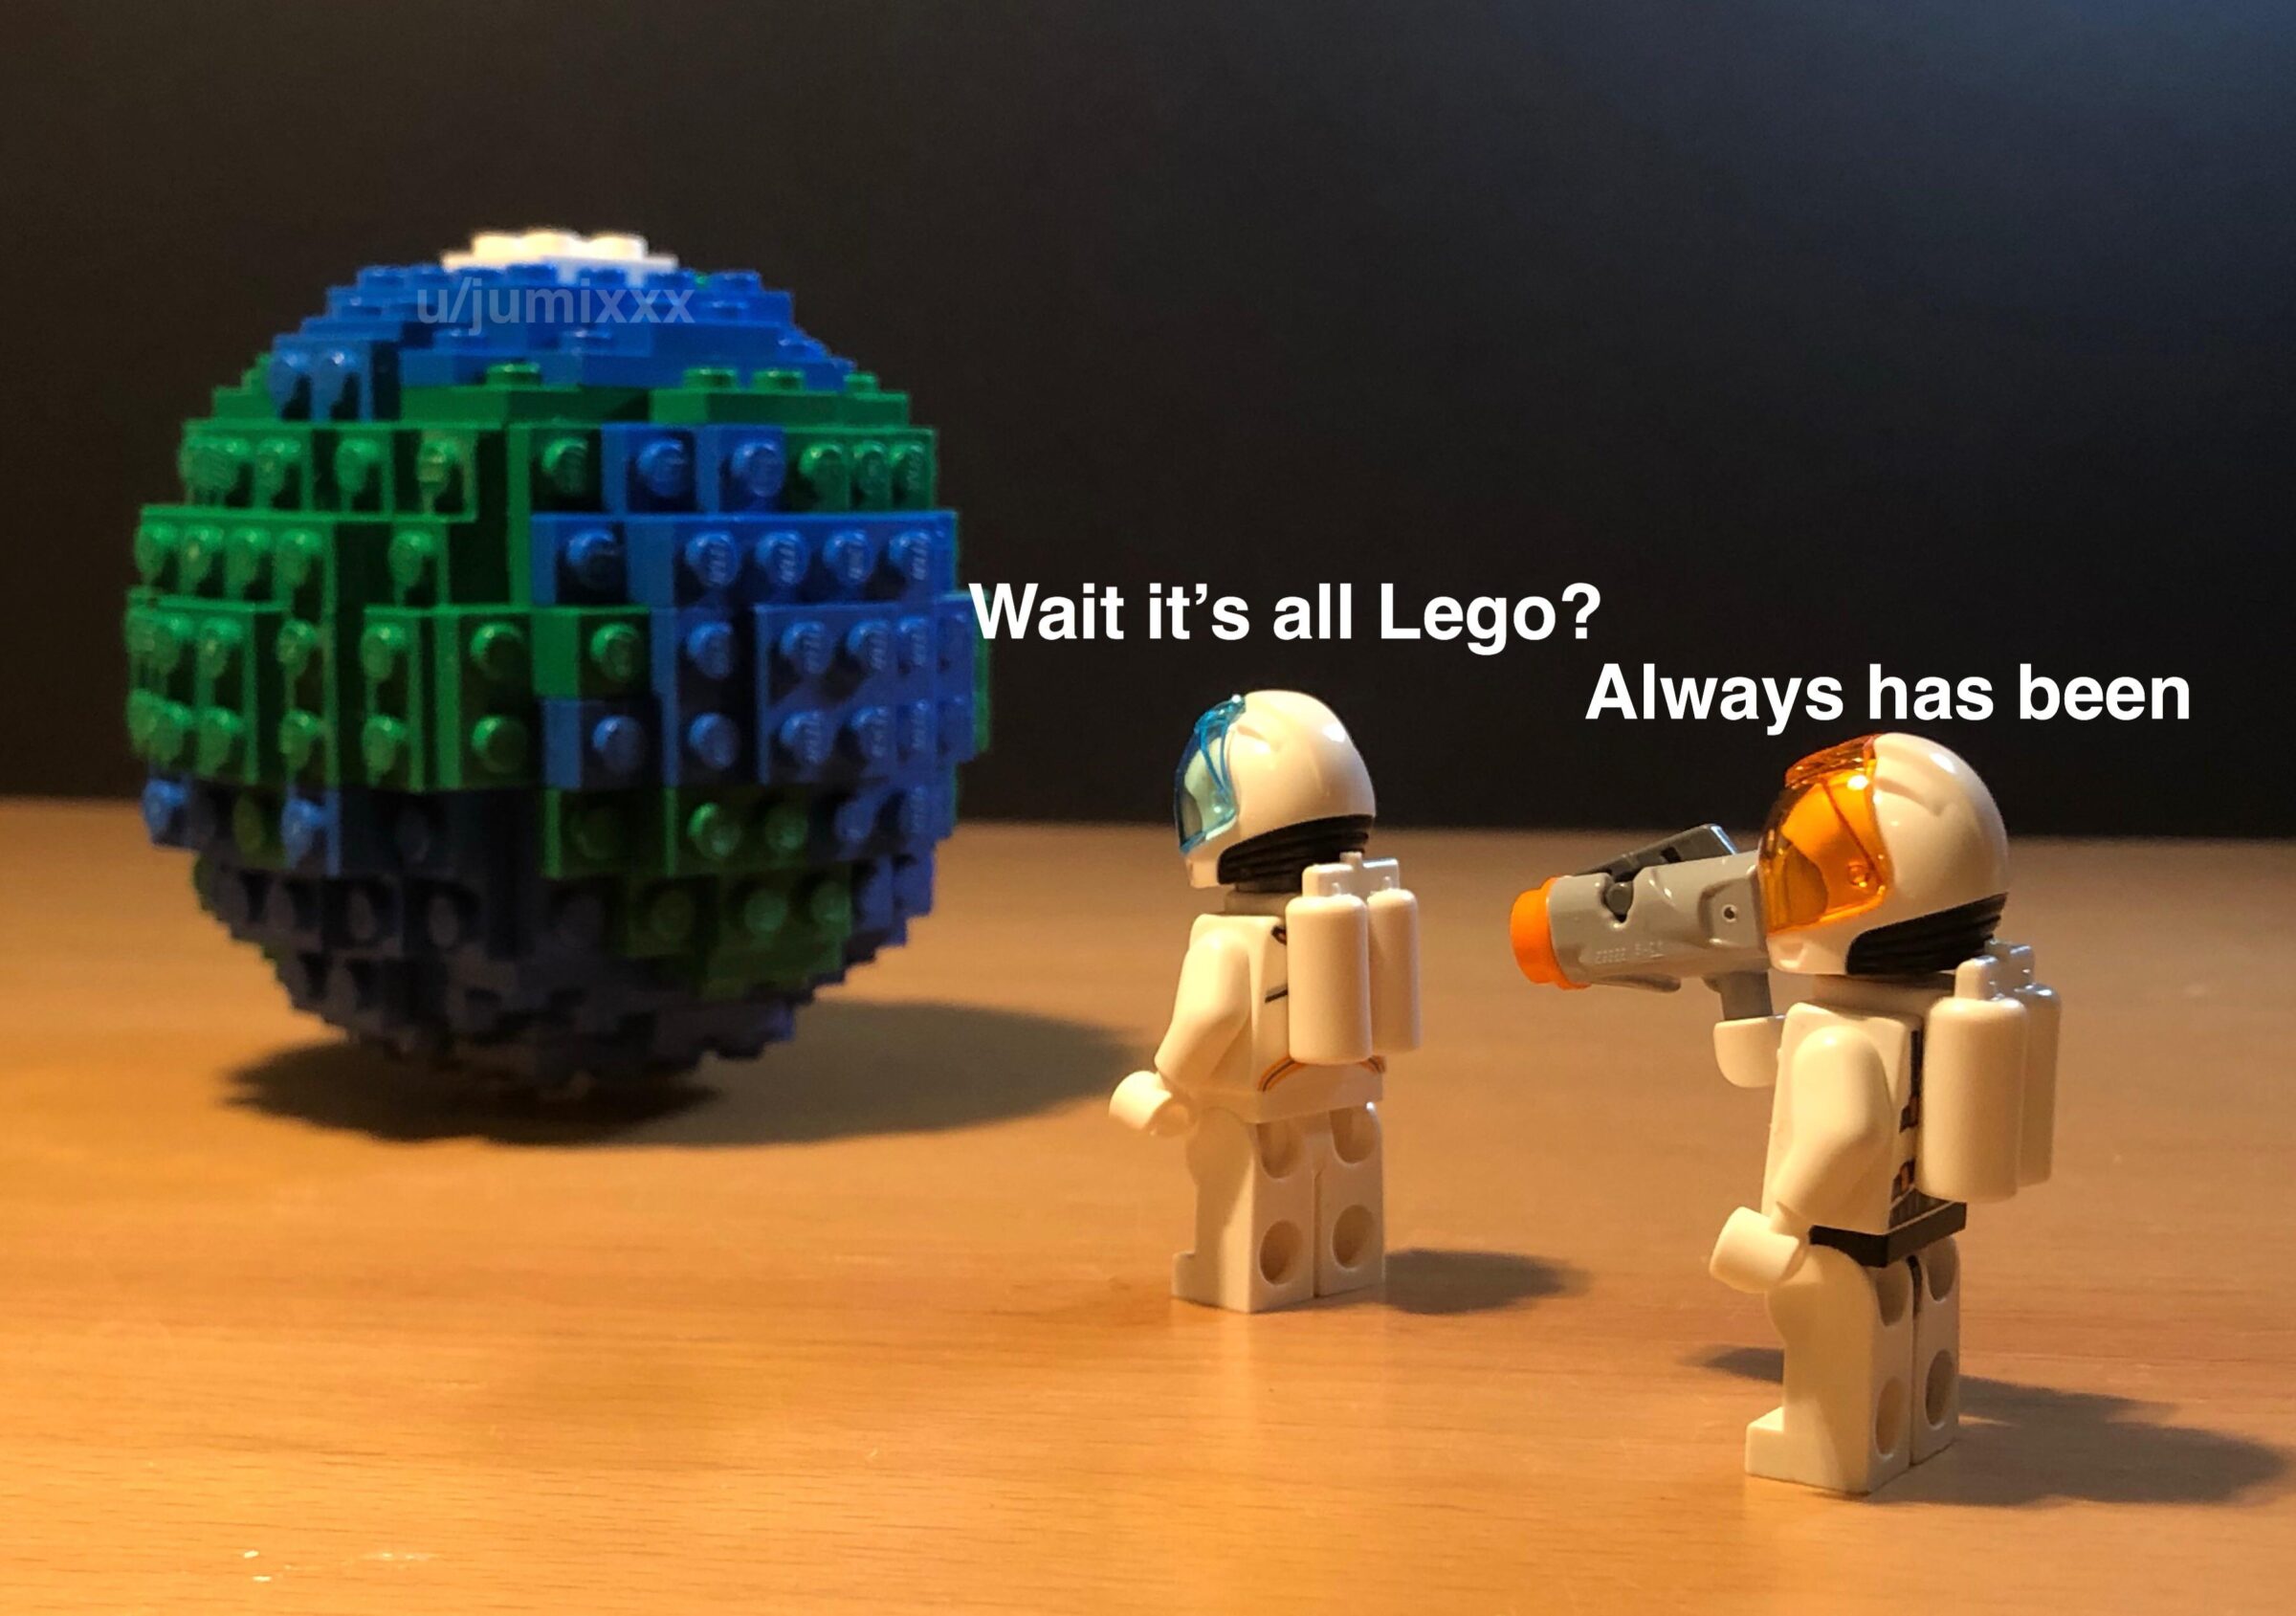 Funny, LEGO, Lego, Earth, WgXcQ, Qw4 other memes Funny, LEGO, Lego, Earth, WgXcQ, Qw4 text: Wait it's all Lego? Always has been 